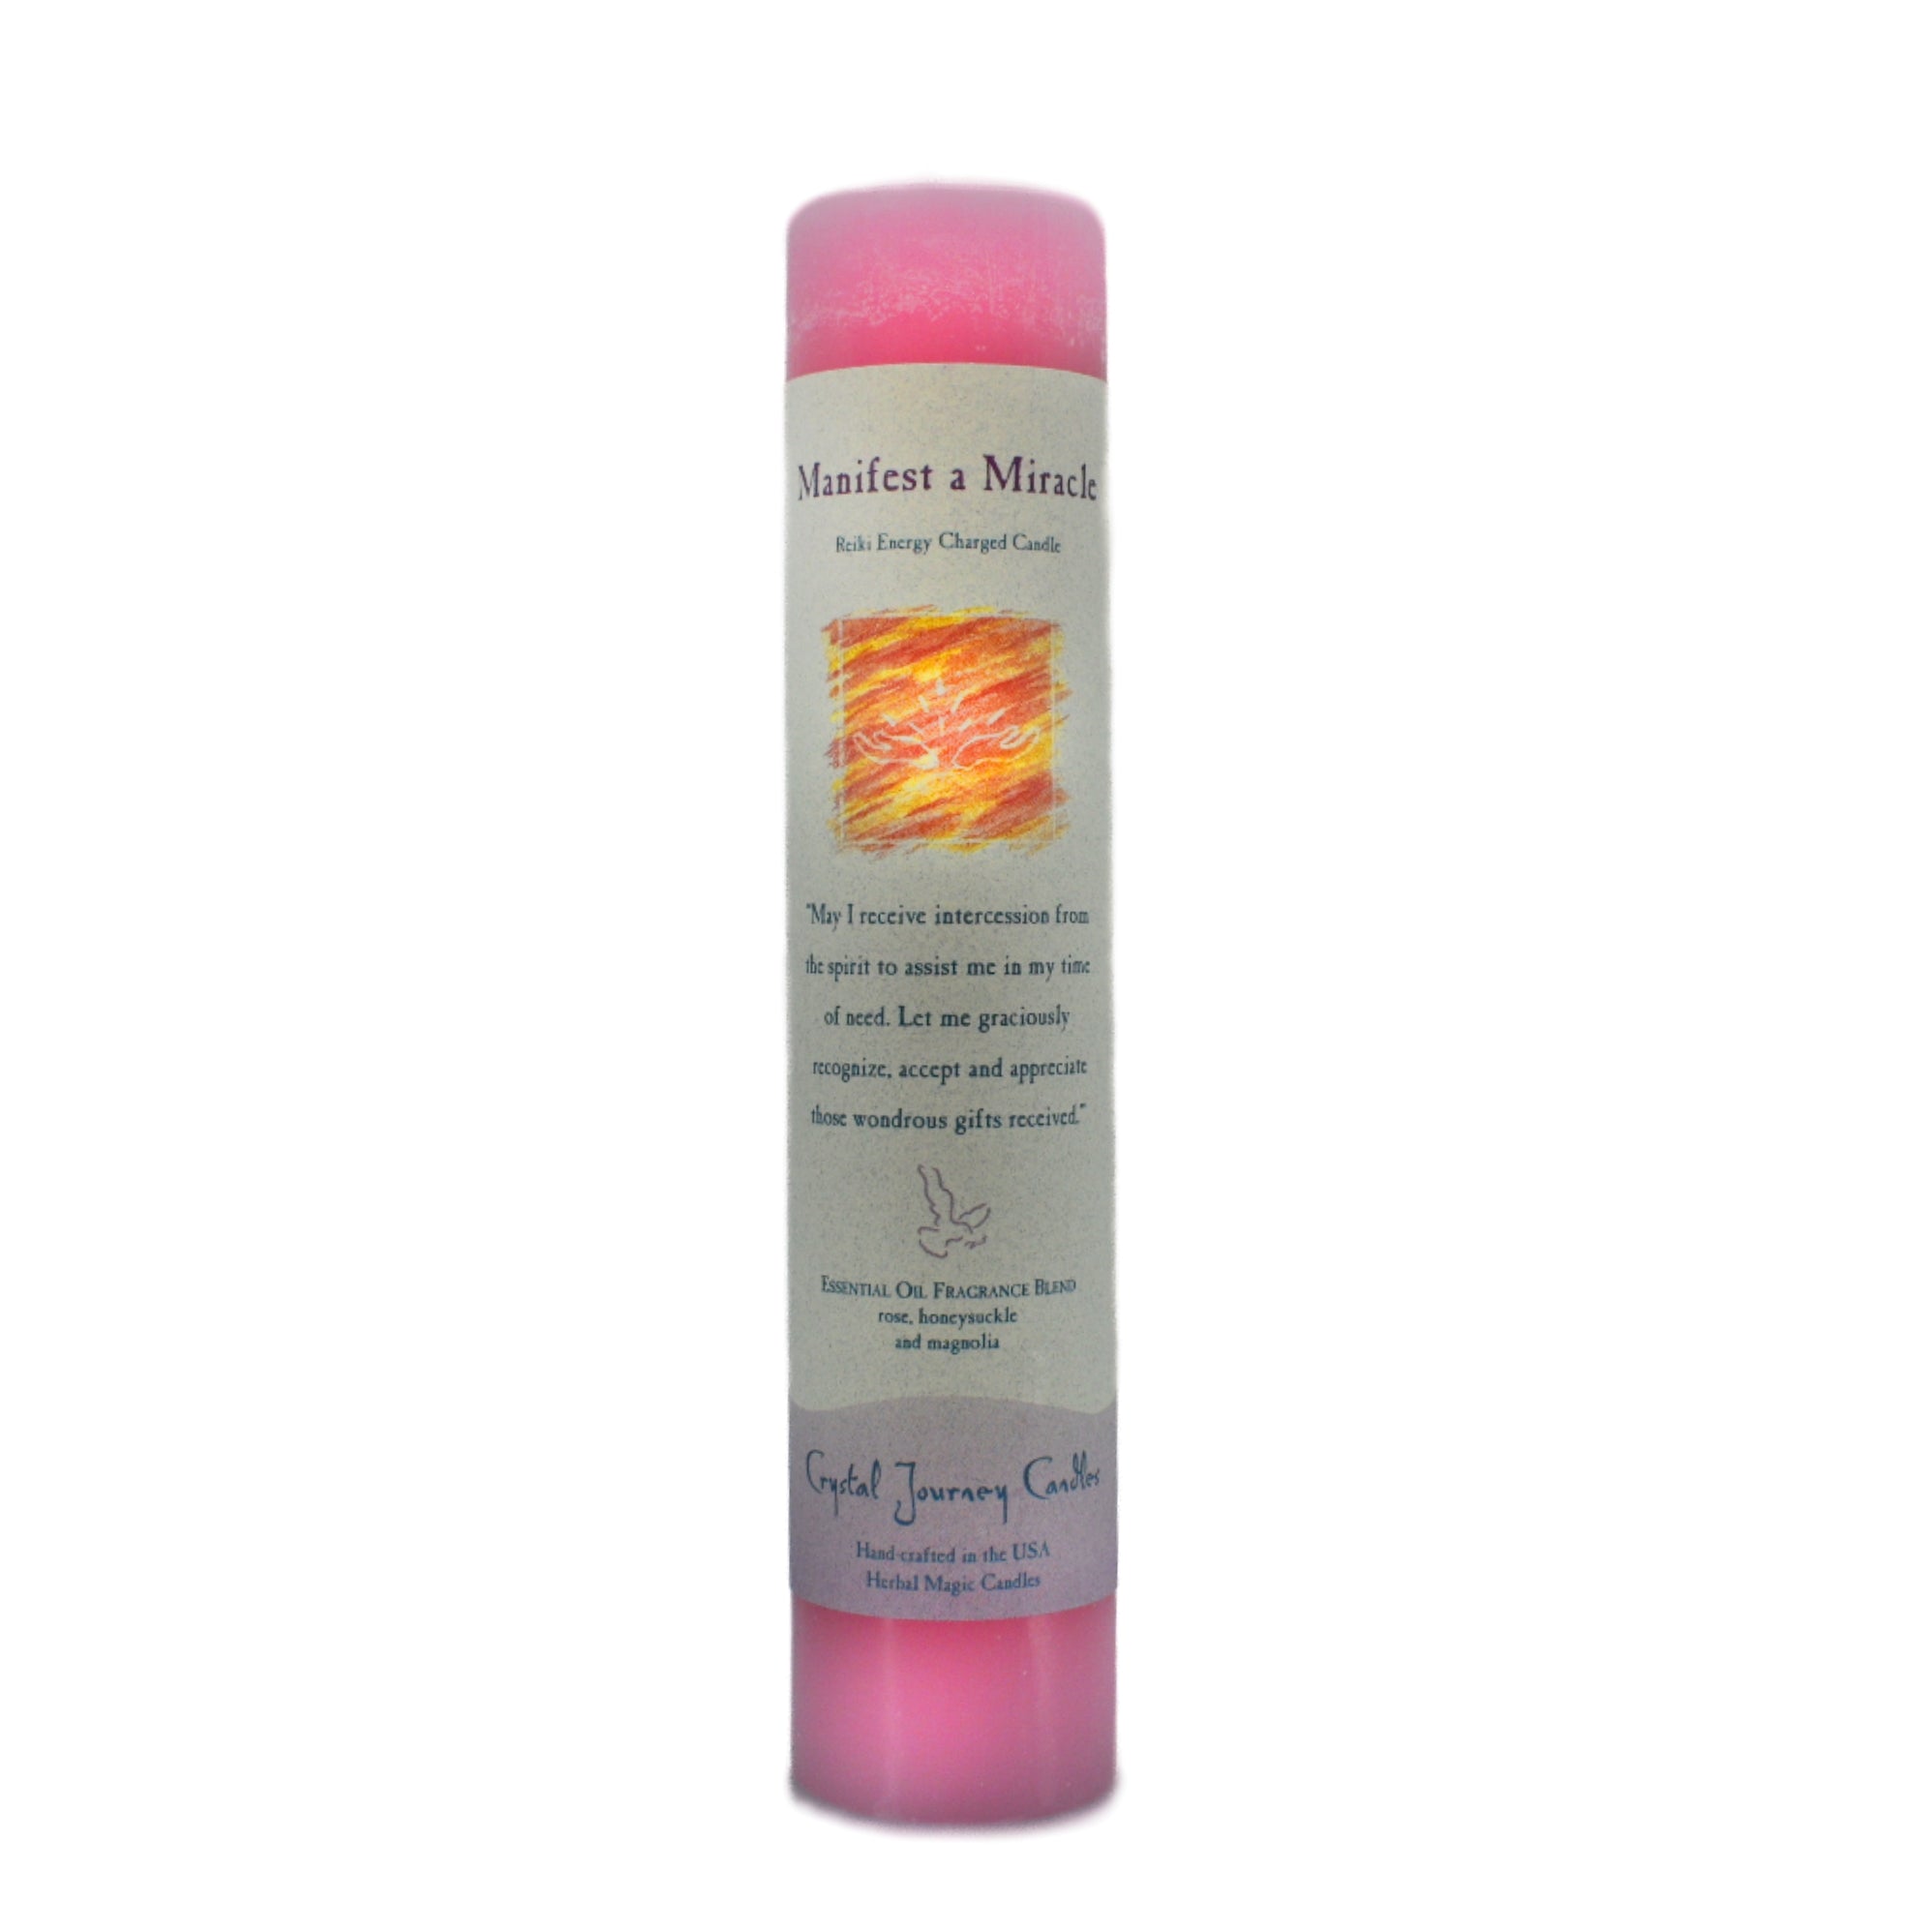 Manifest a Miracle Pillar Candle.  Use to aid and  enhance your love and desire.  The candle was made using essential oils magnolia, honeysuckle and rose.